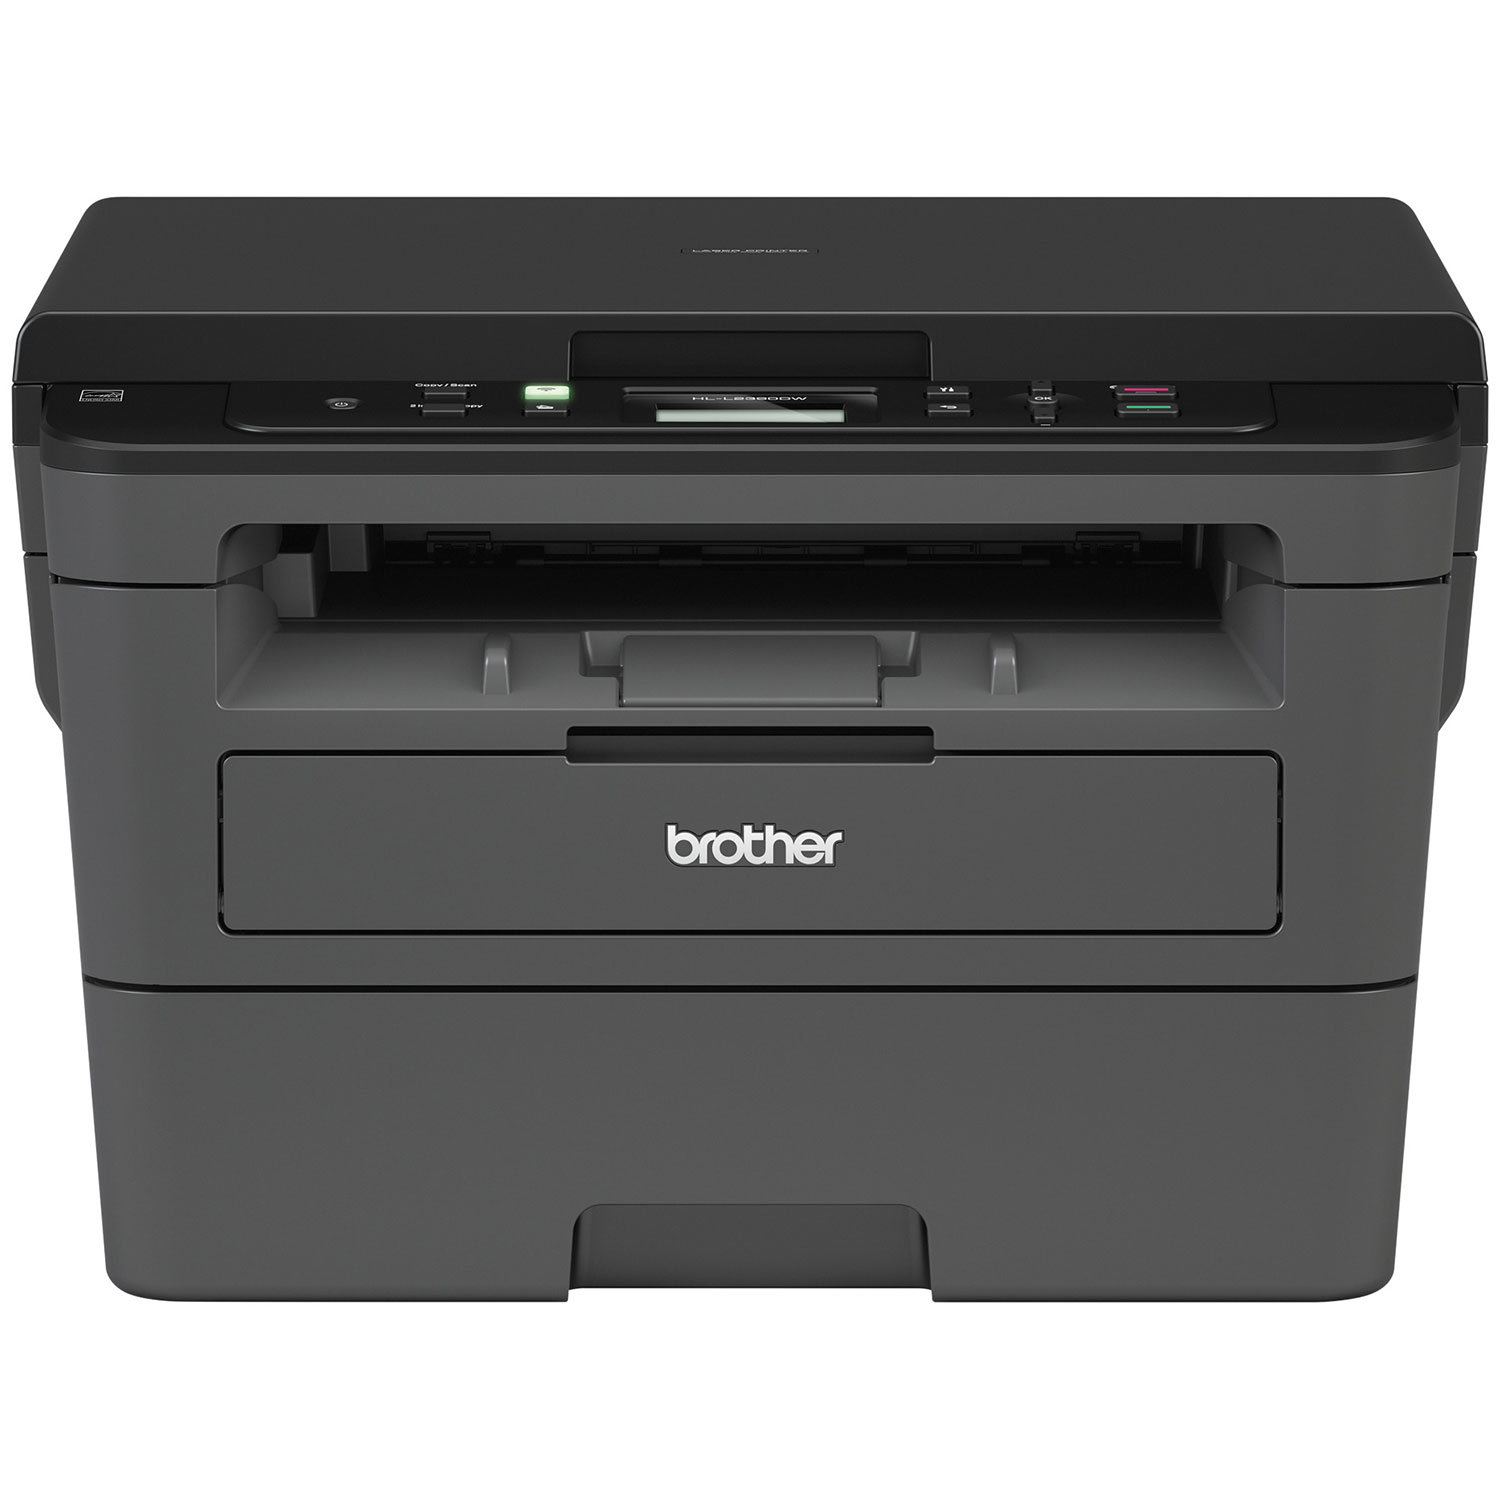 Brother Monochrome Wireless All-in-One Laser Printer (HLL2390DW)